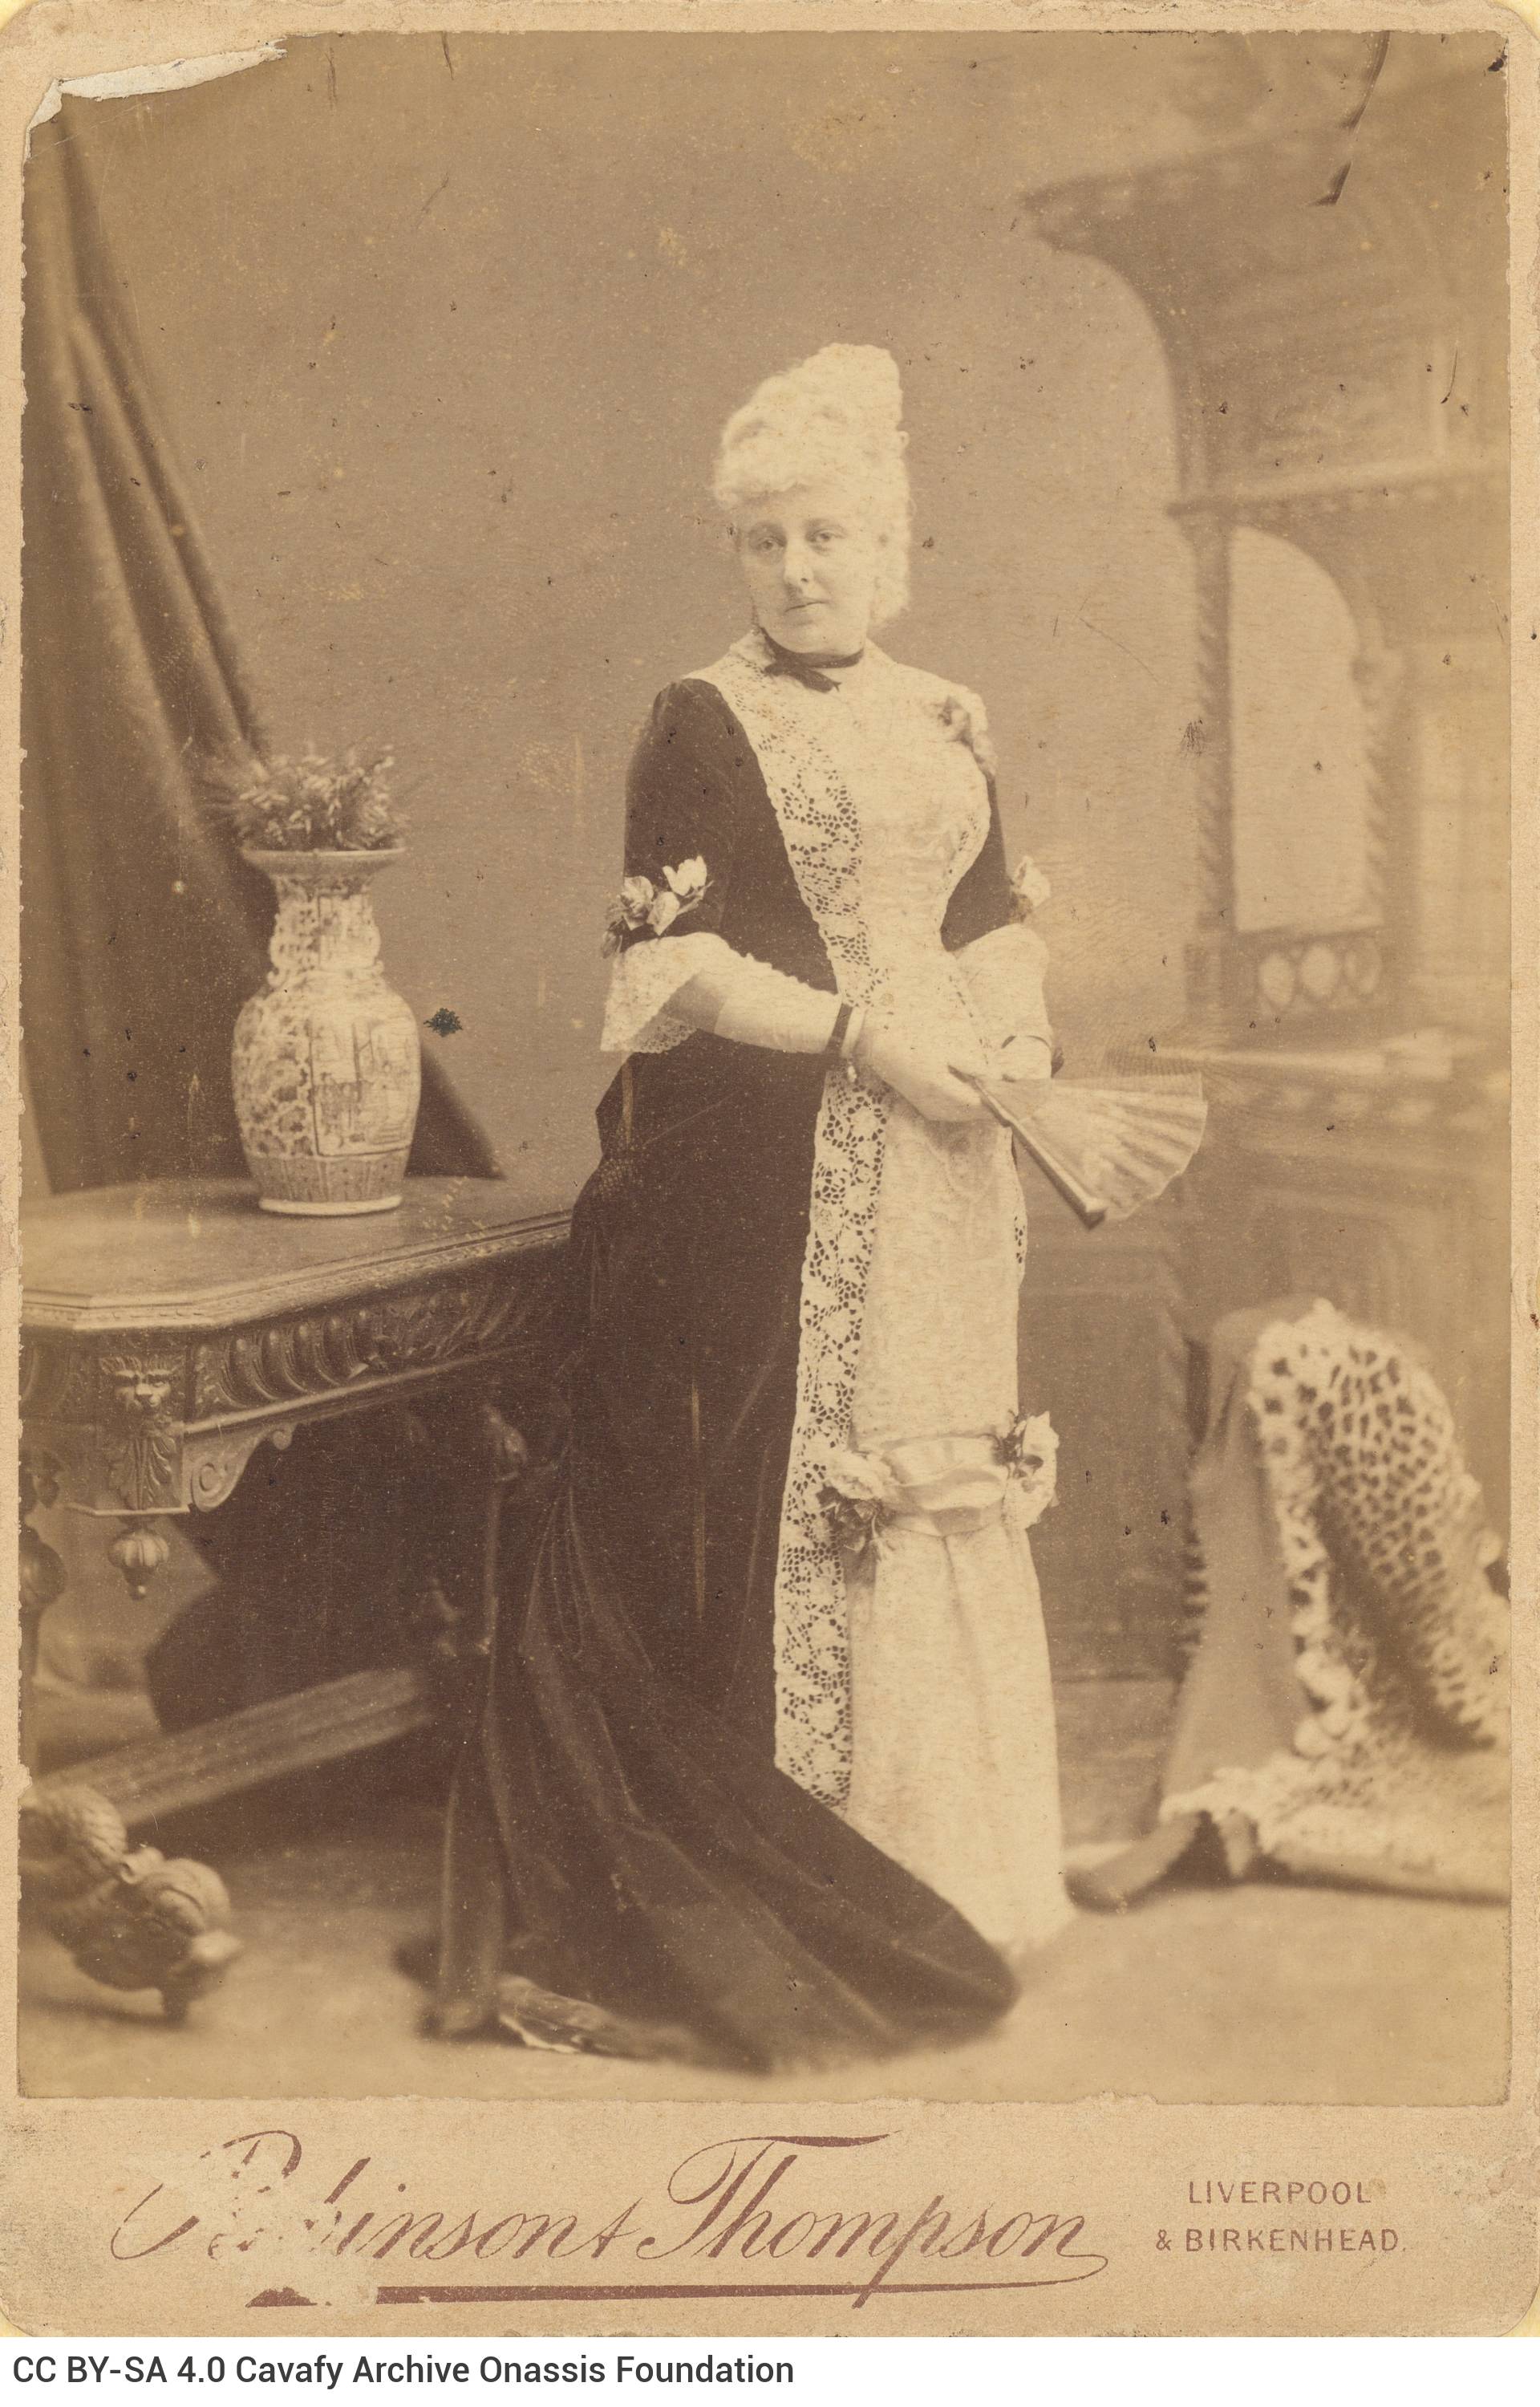 Photograph of a woman standing next to a table. She is wearing a long dress with a tail and is holding a fan. Handwritten dat